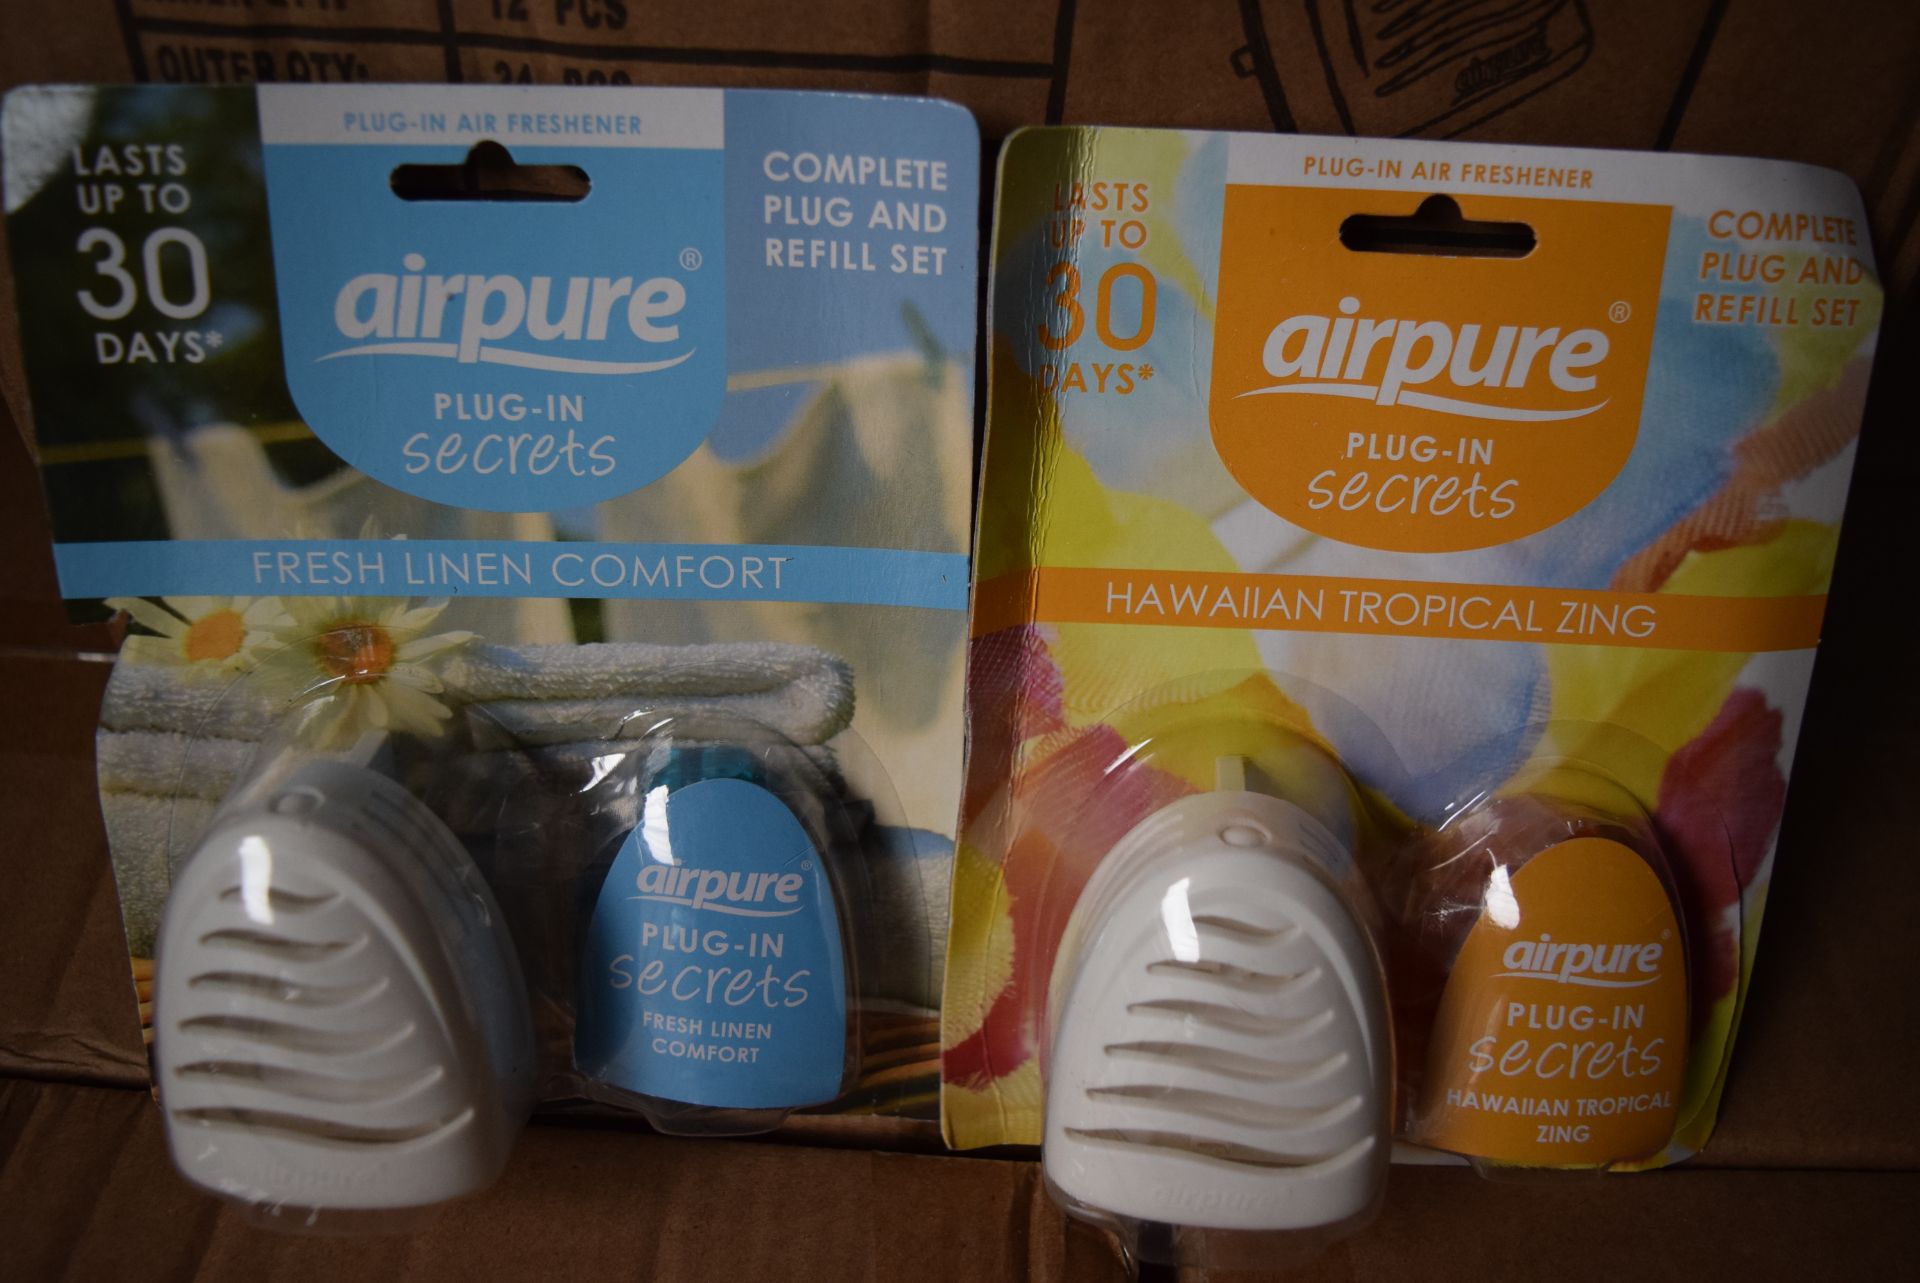 1 X BOX CONTAINING 2 BOXES OF 12 (24 IN TOTAL) OF BRAND NEW SEALED AIRPURE PLUG-IN SECRETS